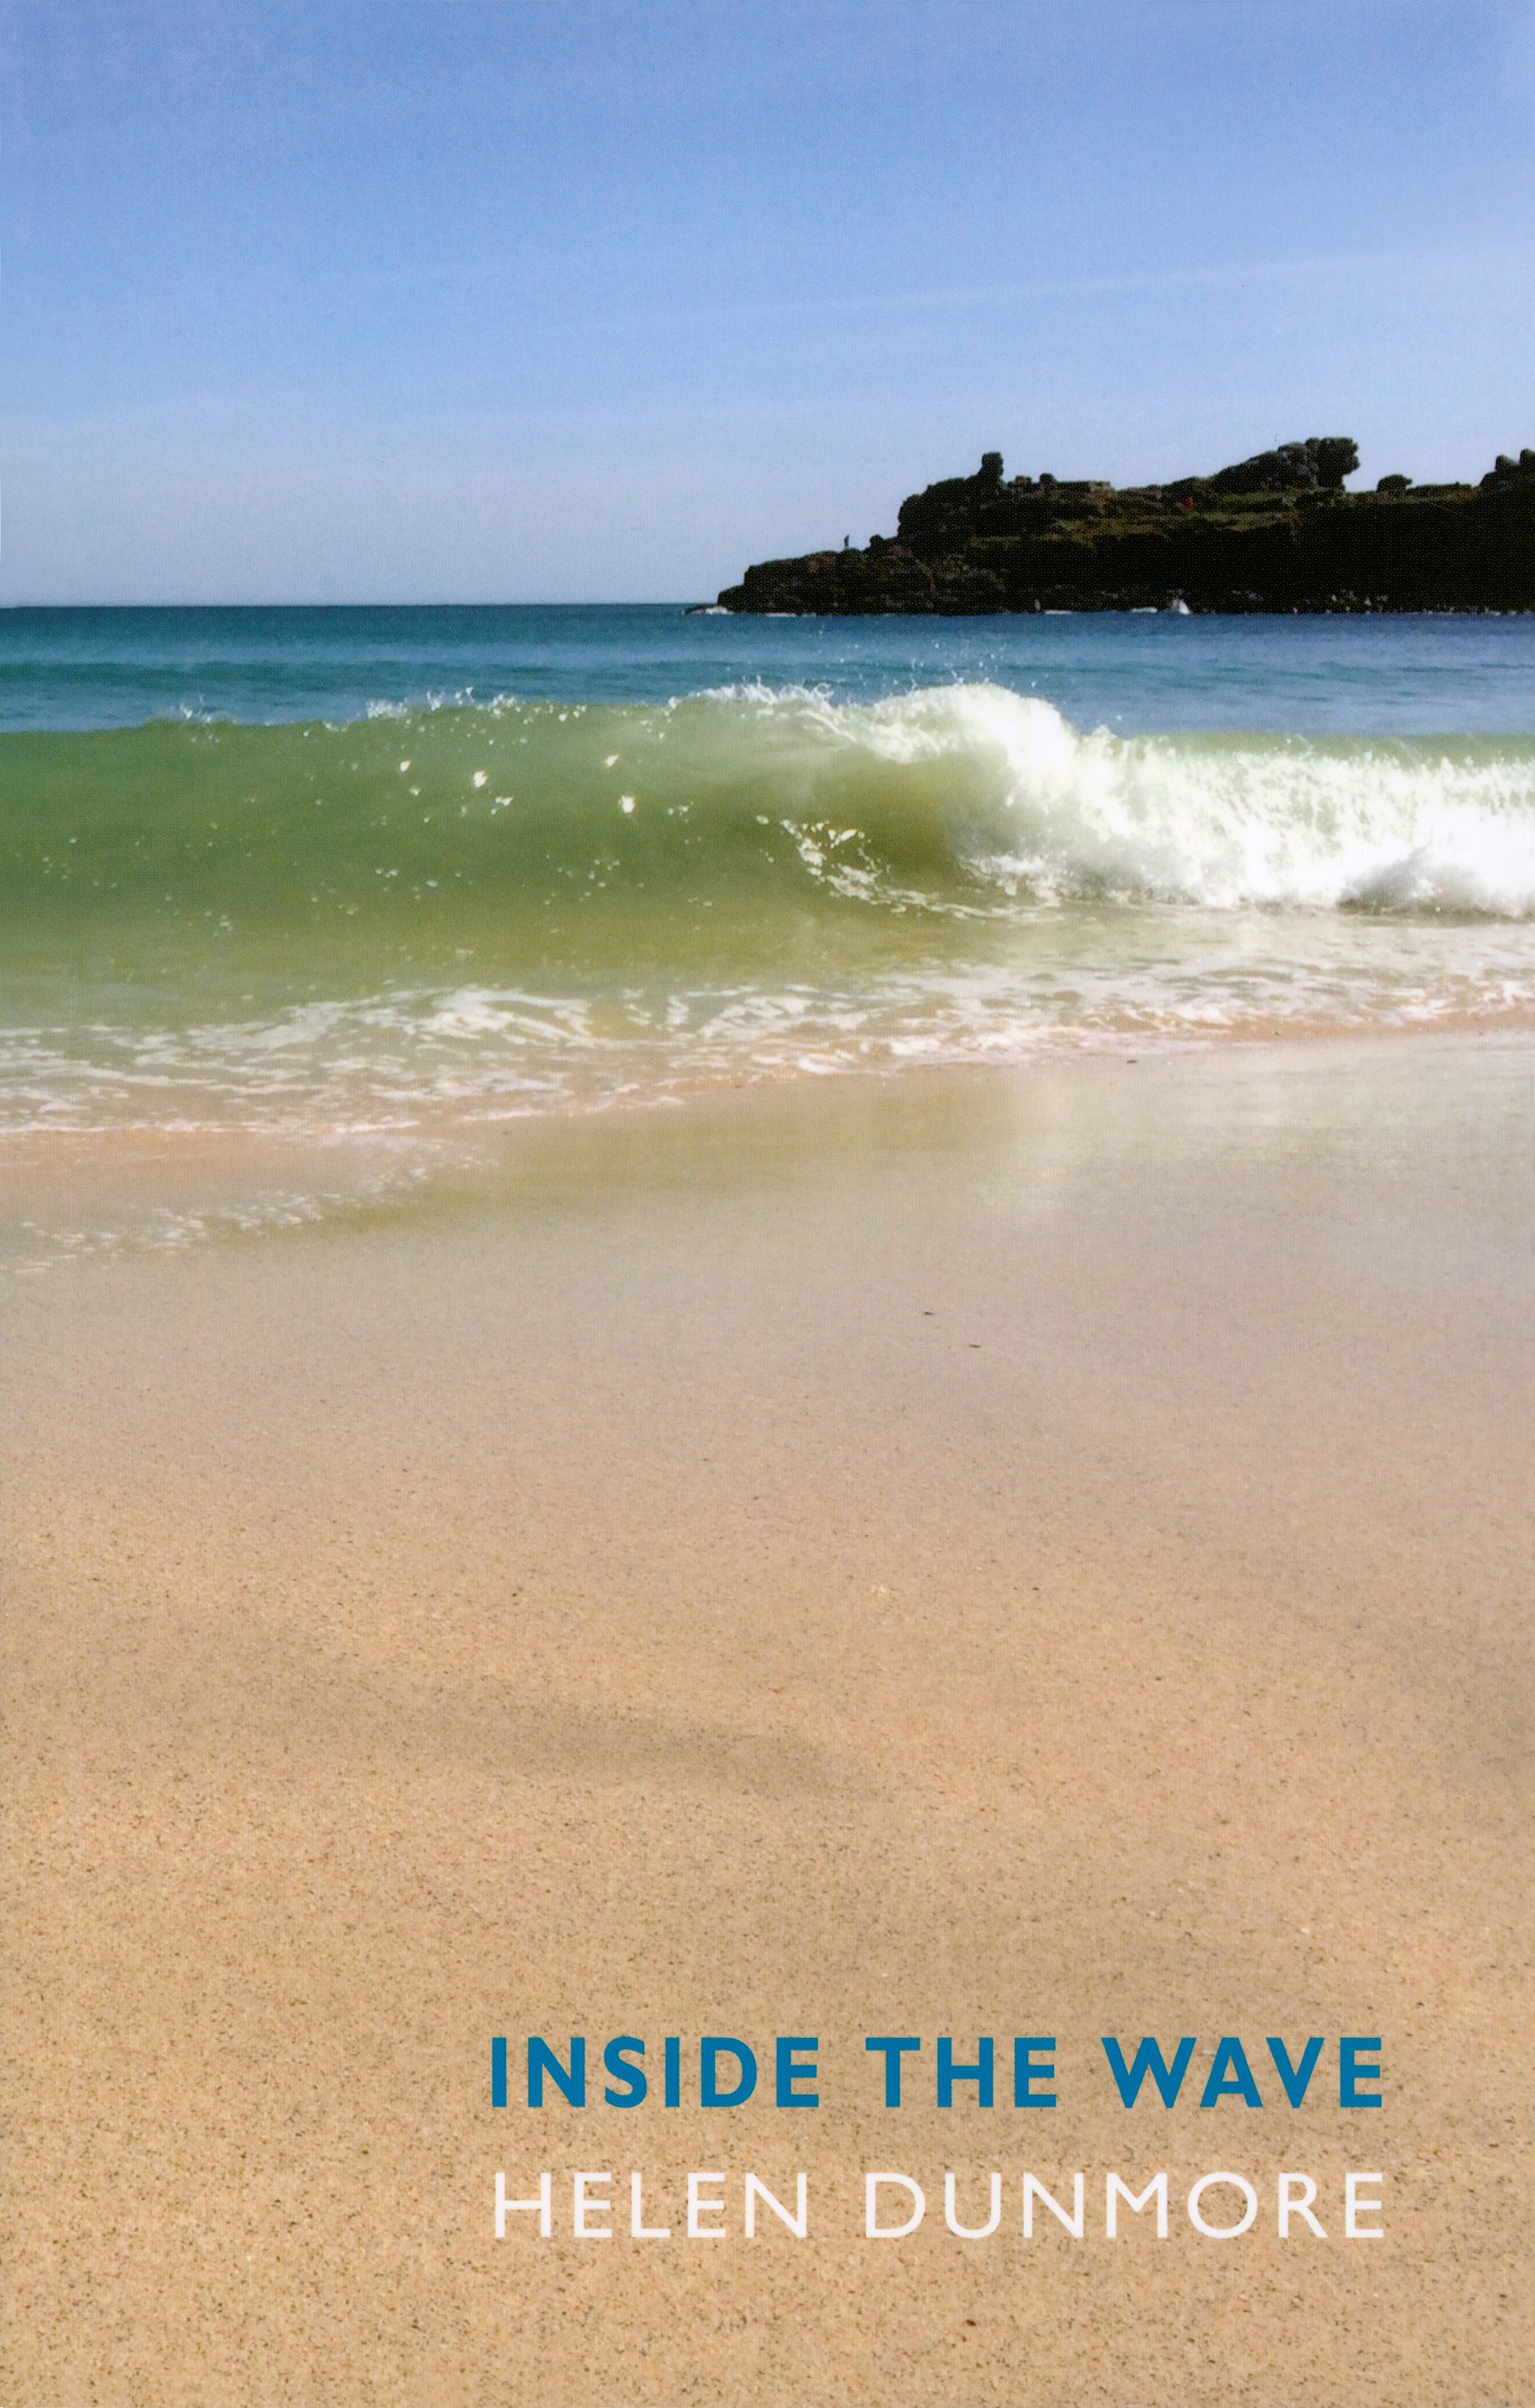 Inside The Wave by Helen Dunmore (Costa Book Awards)